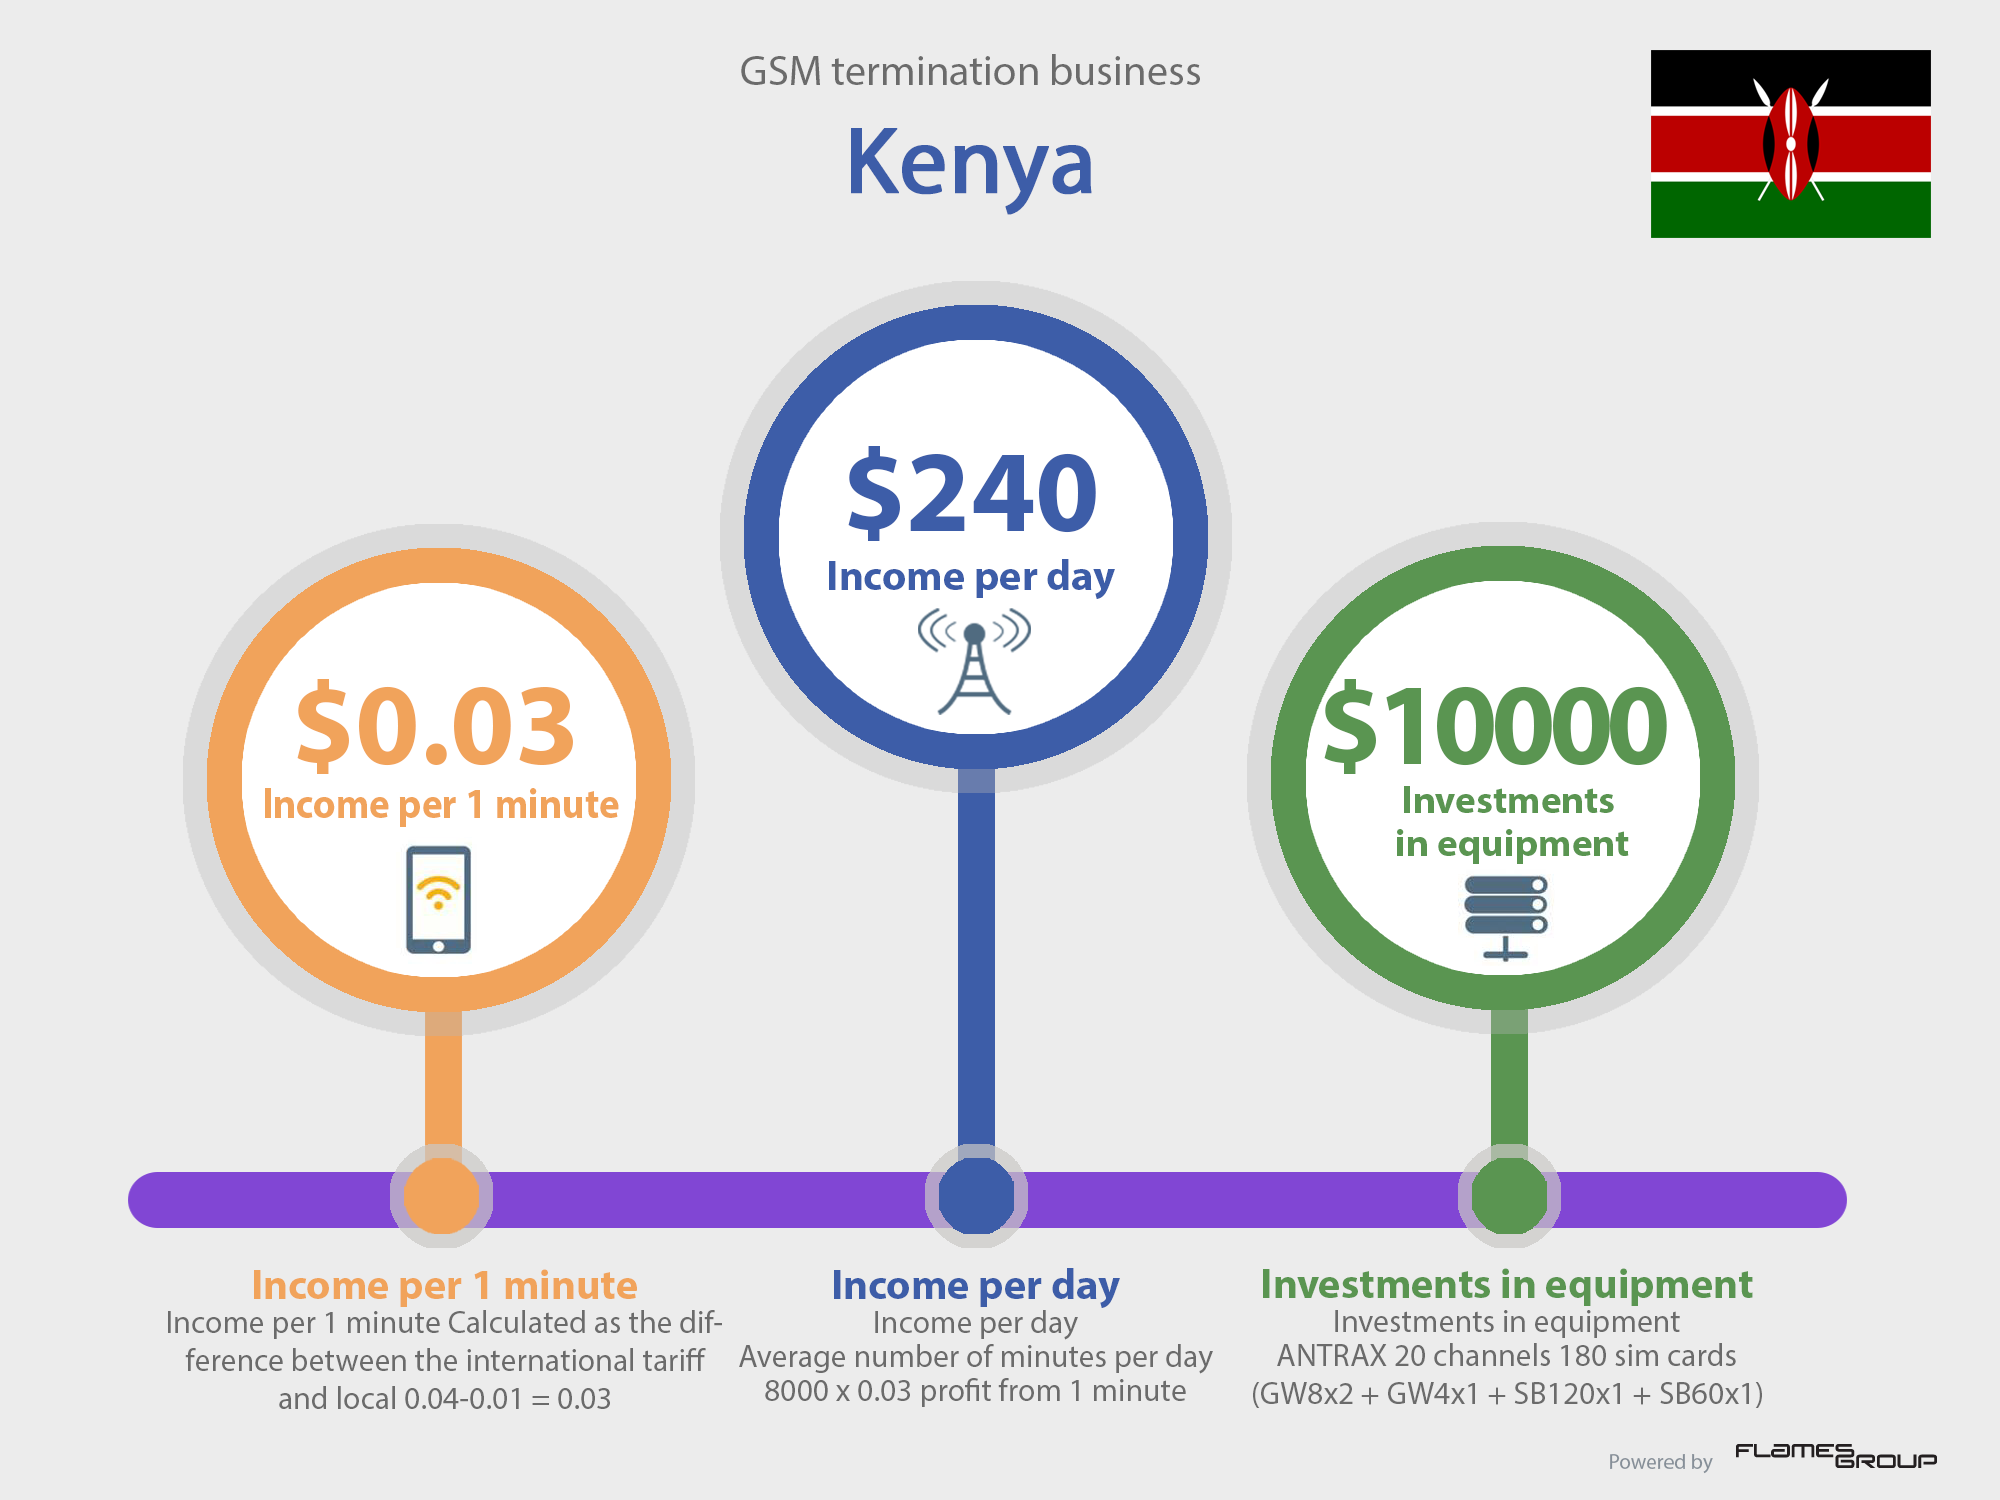 GSM termination in Kenya - Infographic ANTRAX